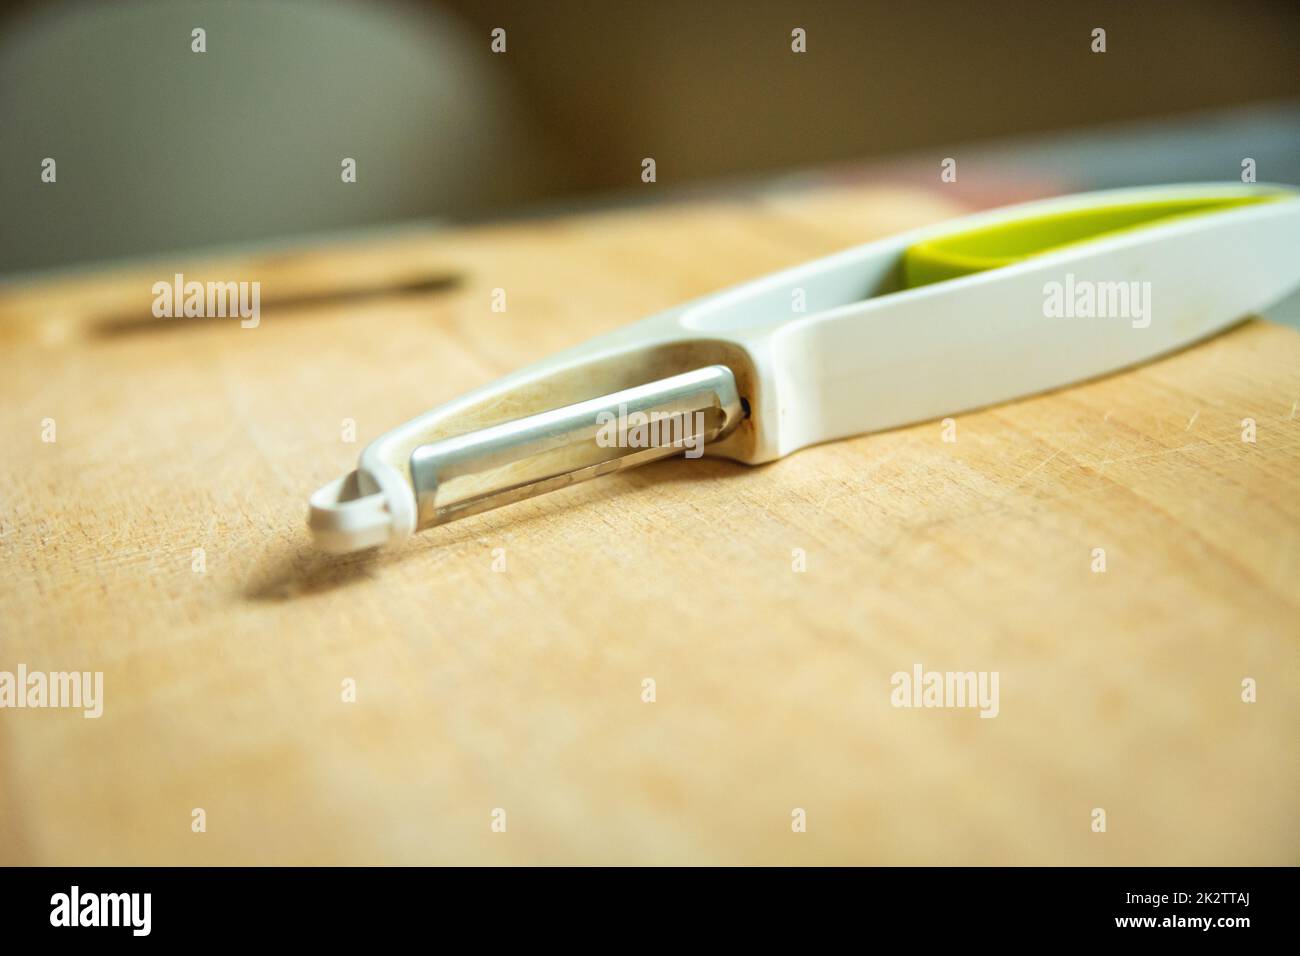 A kitchen tool for peeling vegetables is lying on a wooden board Stock Photo